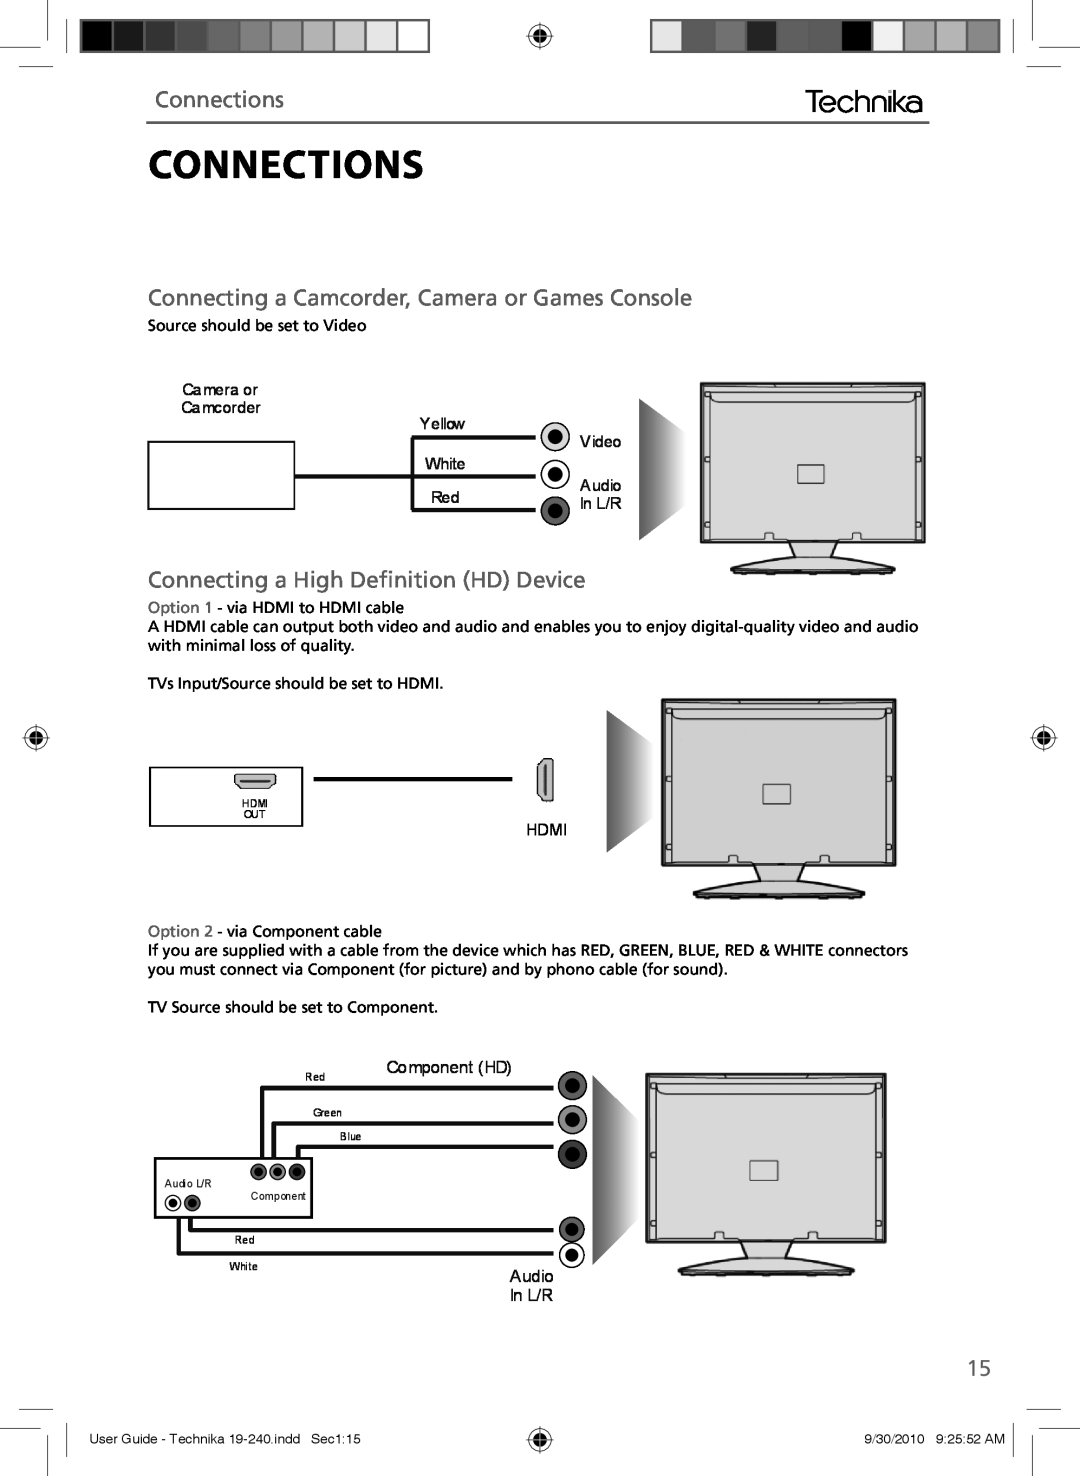 Technika LCD 19-240 Connecting a Camcorder, Camera or Games Console, Connecting a High Deﬁnition HD Device, Connections 